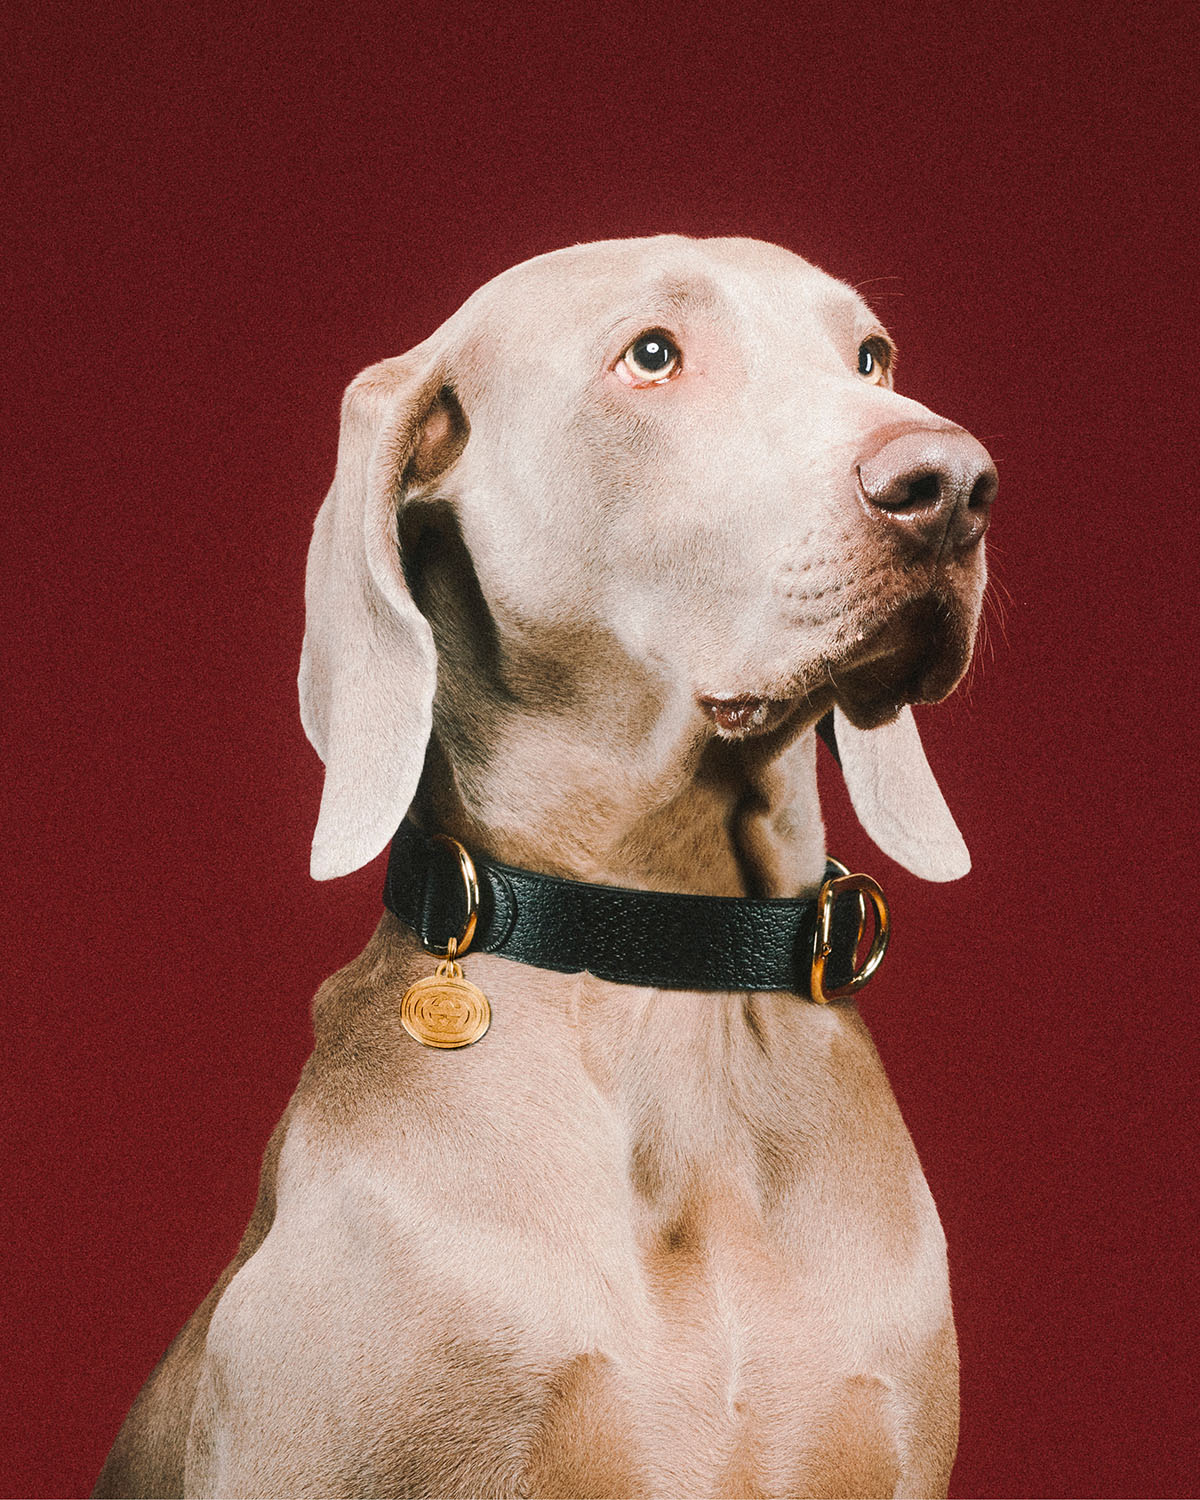 gucci on X: The Gucci Pet Collection is here. The wide-ranging